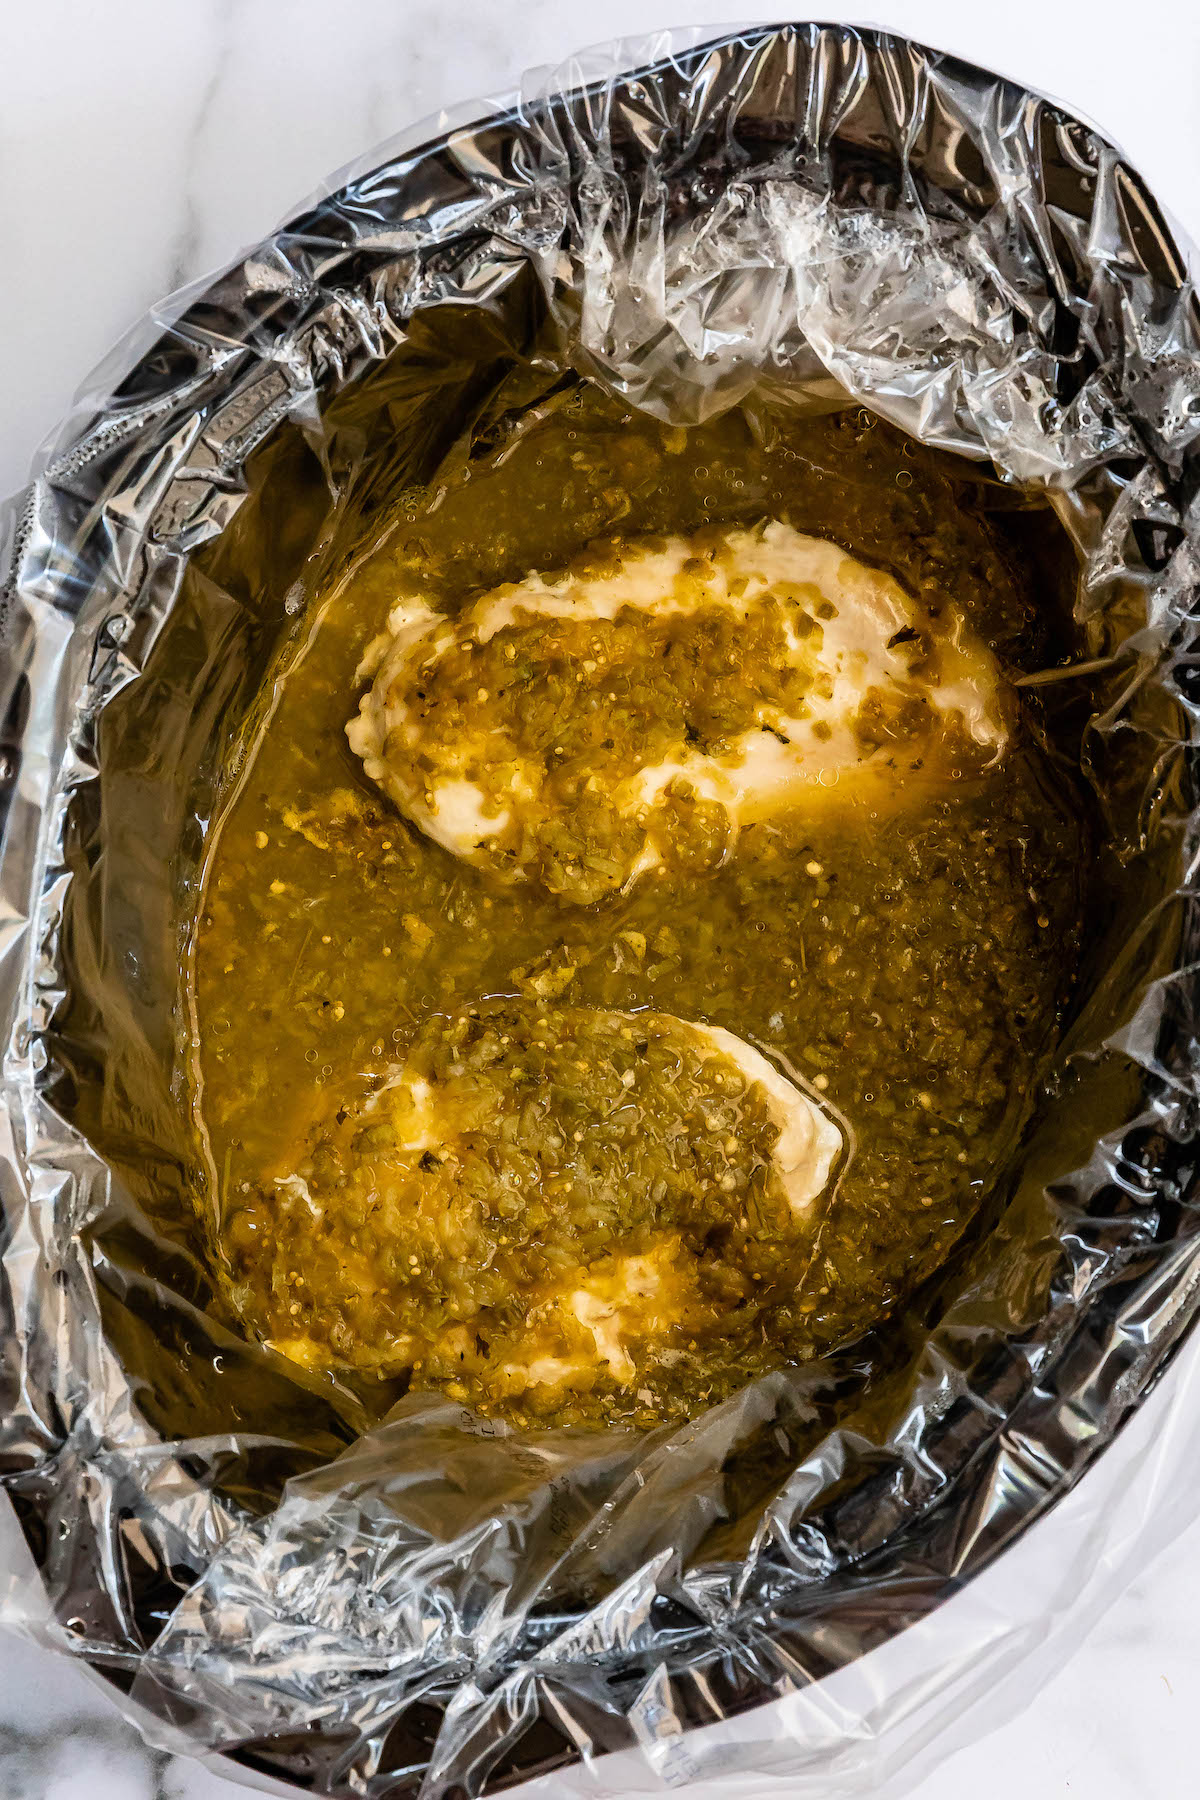 2 chicken breasts in crockpot with green salsa.